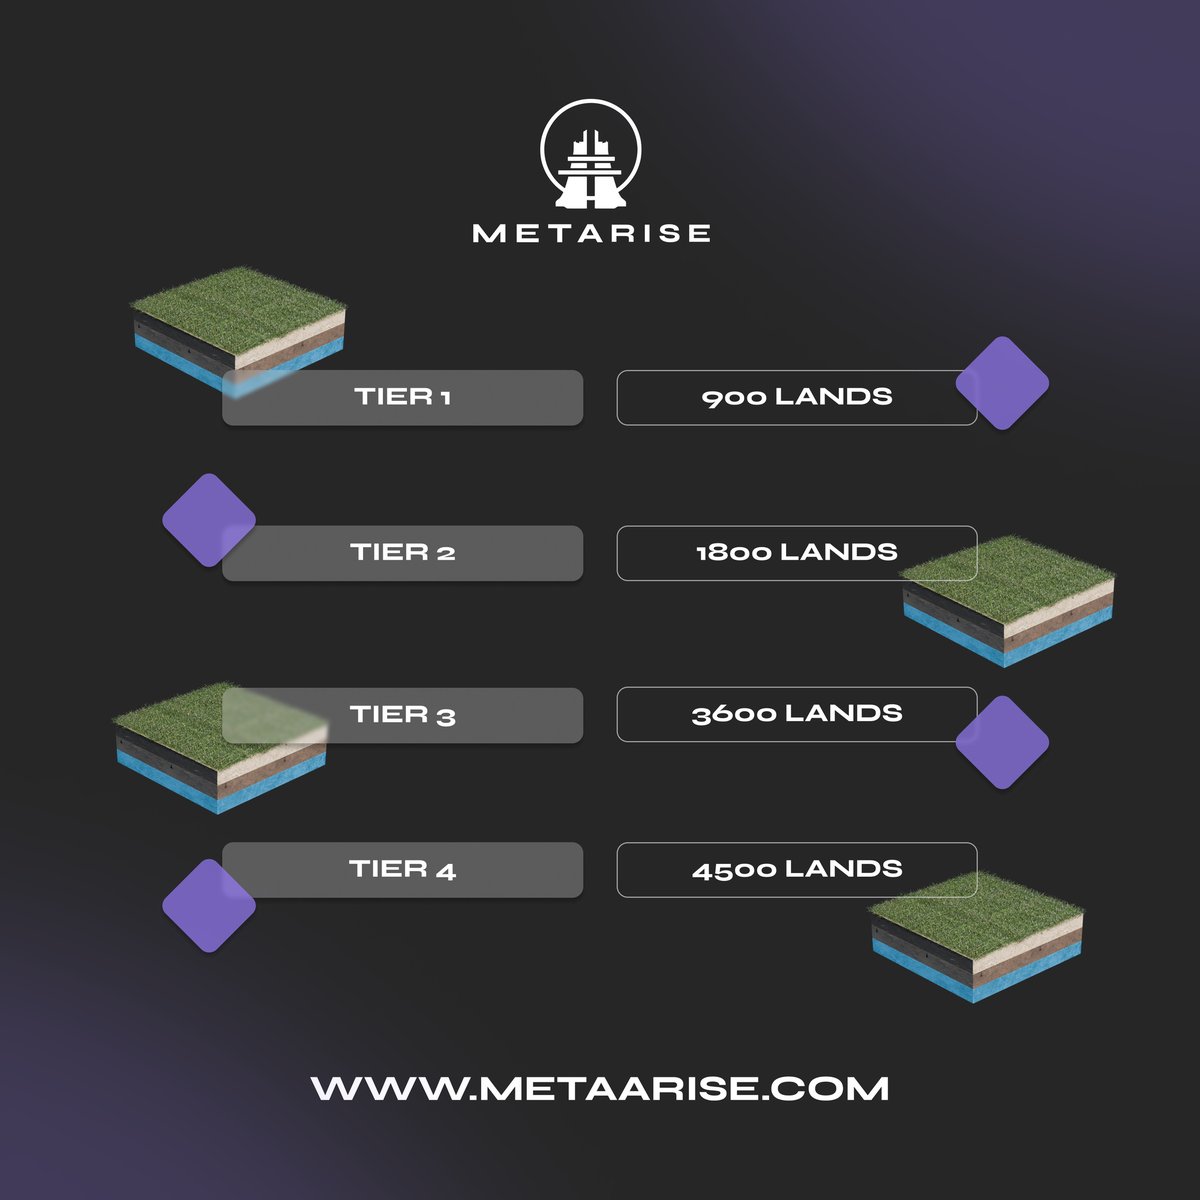 Choose your tier, secure your spot. A range of virtual lands awaits in METARISE – find the one that fits your vision! 🌐✨ #Metarise #VirtualRealEstate #LandPresale #Metaverse #DigitalLands